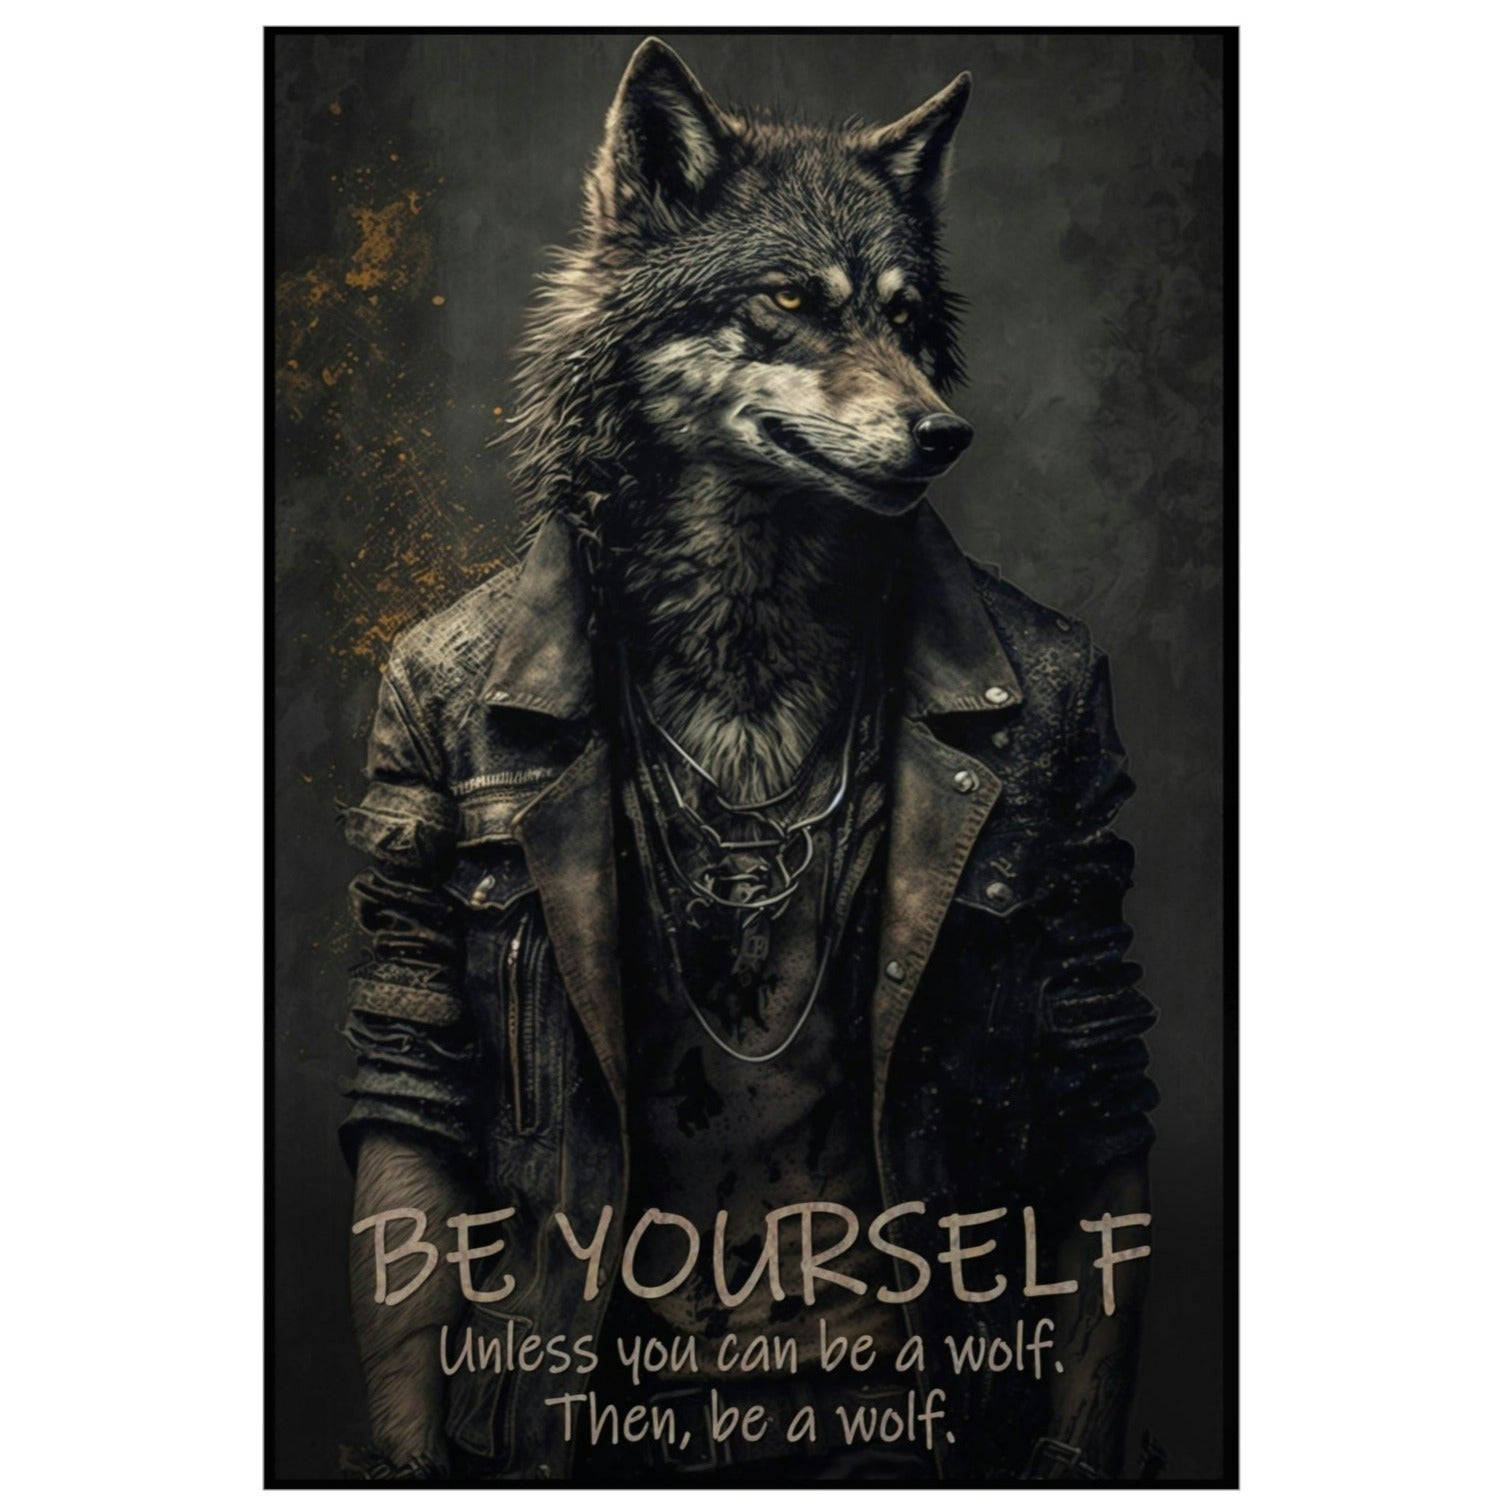 Wolf Inspirational Quotes - Be Yourself Unless You Can Be a Wolf - Then, Be a Wolf - Premium Matte Vertical Posters